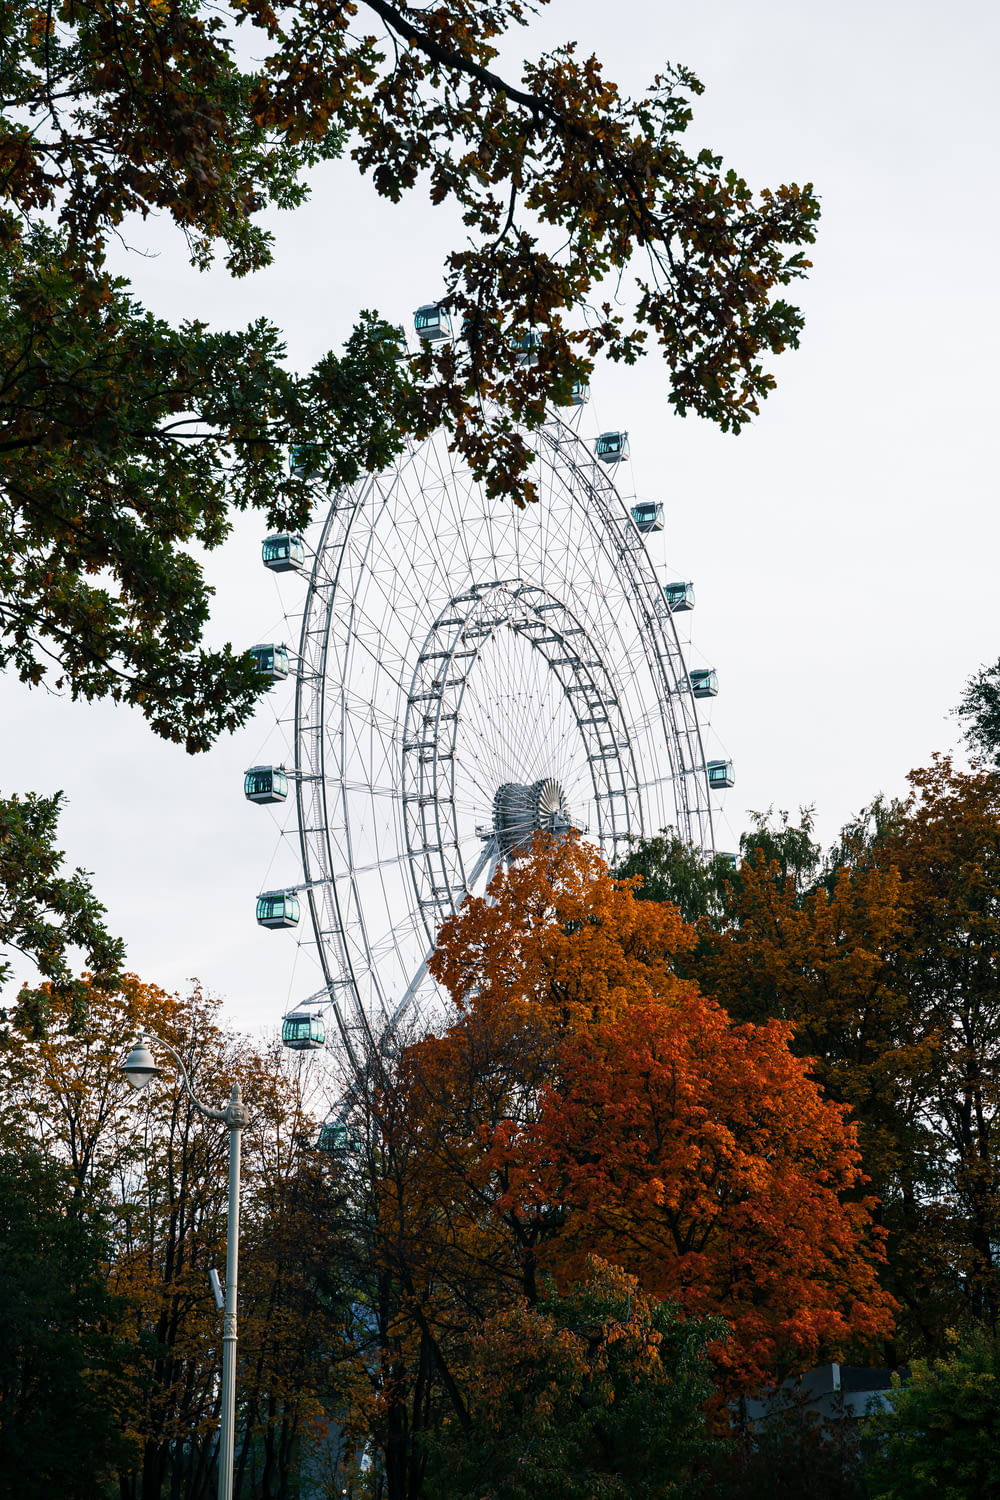 a large ferris wheel in the middle of a park